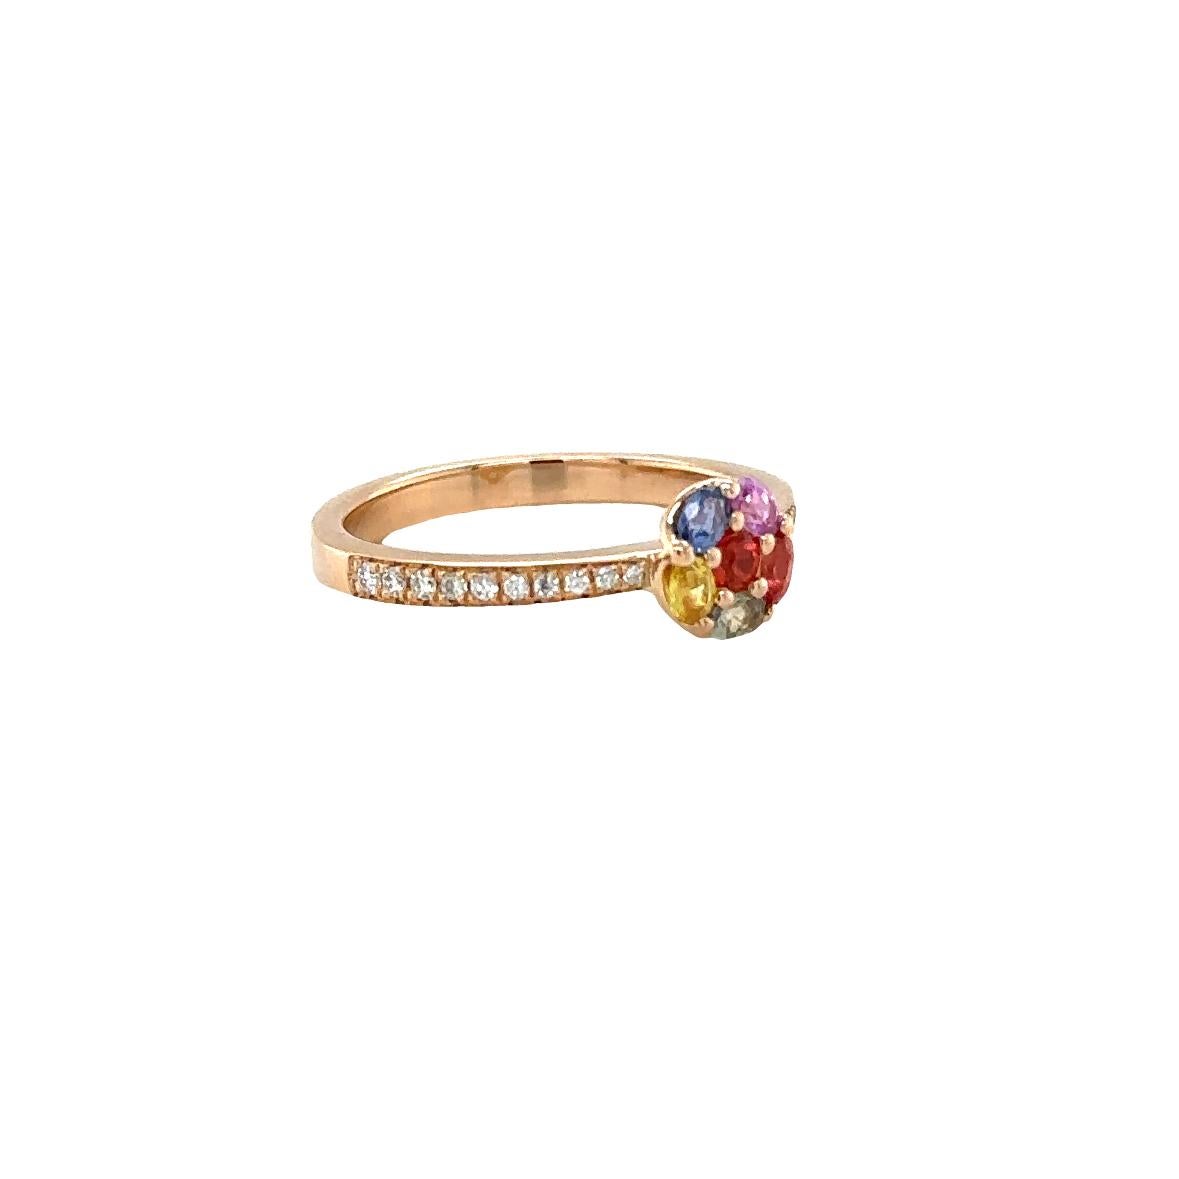 Introducing the RIAD Ring, a masterpiece crafted in 18kt Rose Gold, weighing 3.30 grams. This elegant ring features an array of Colored Sapphires totaling 0.52 carats and is elegantly embellished with dazzling Diamonds of G color and VS clarity,